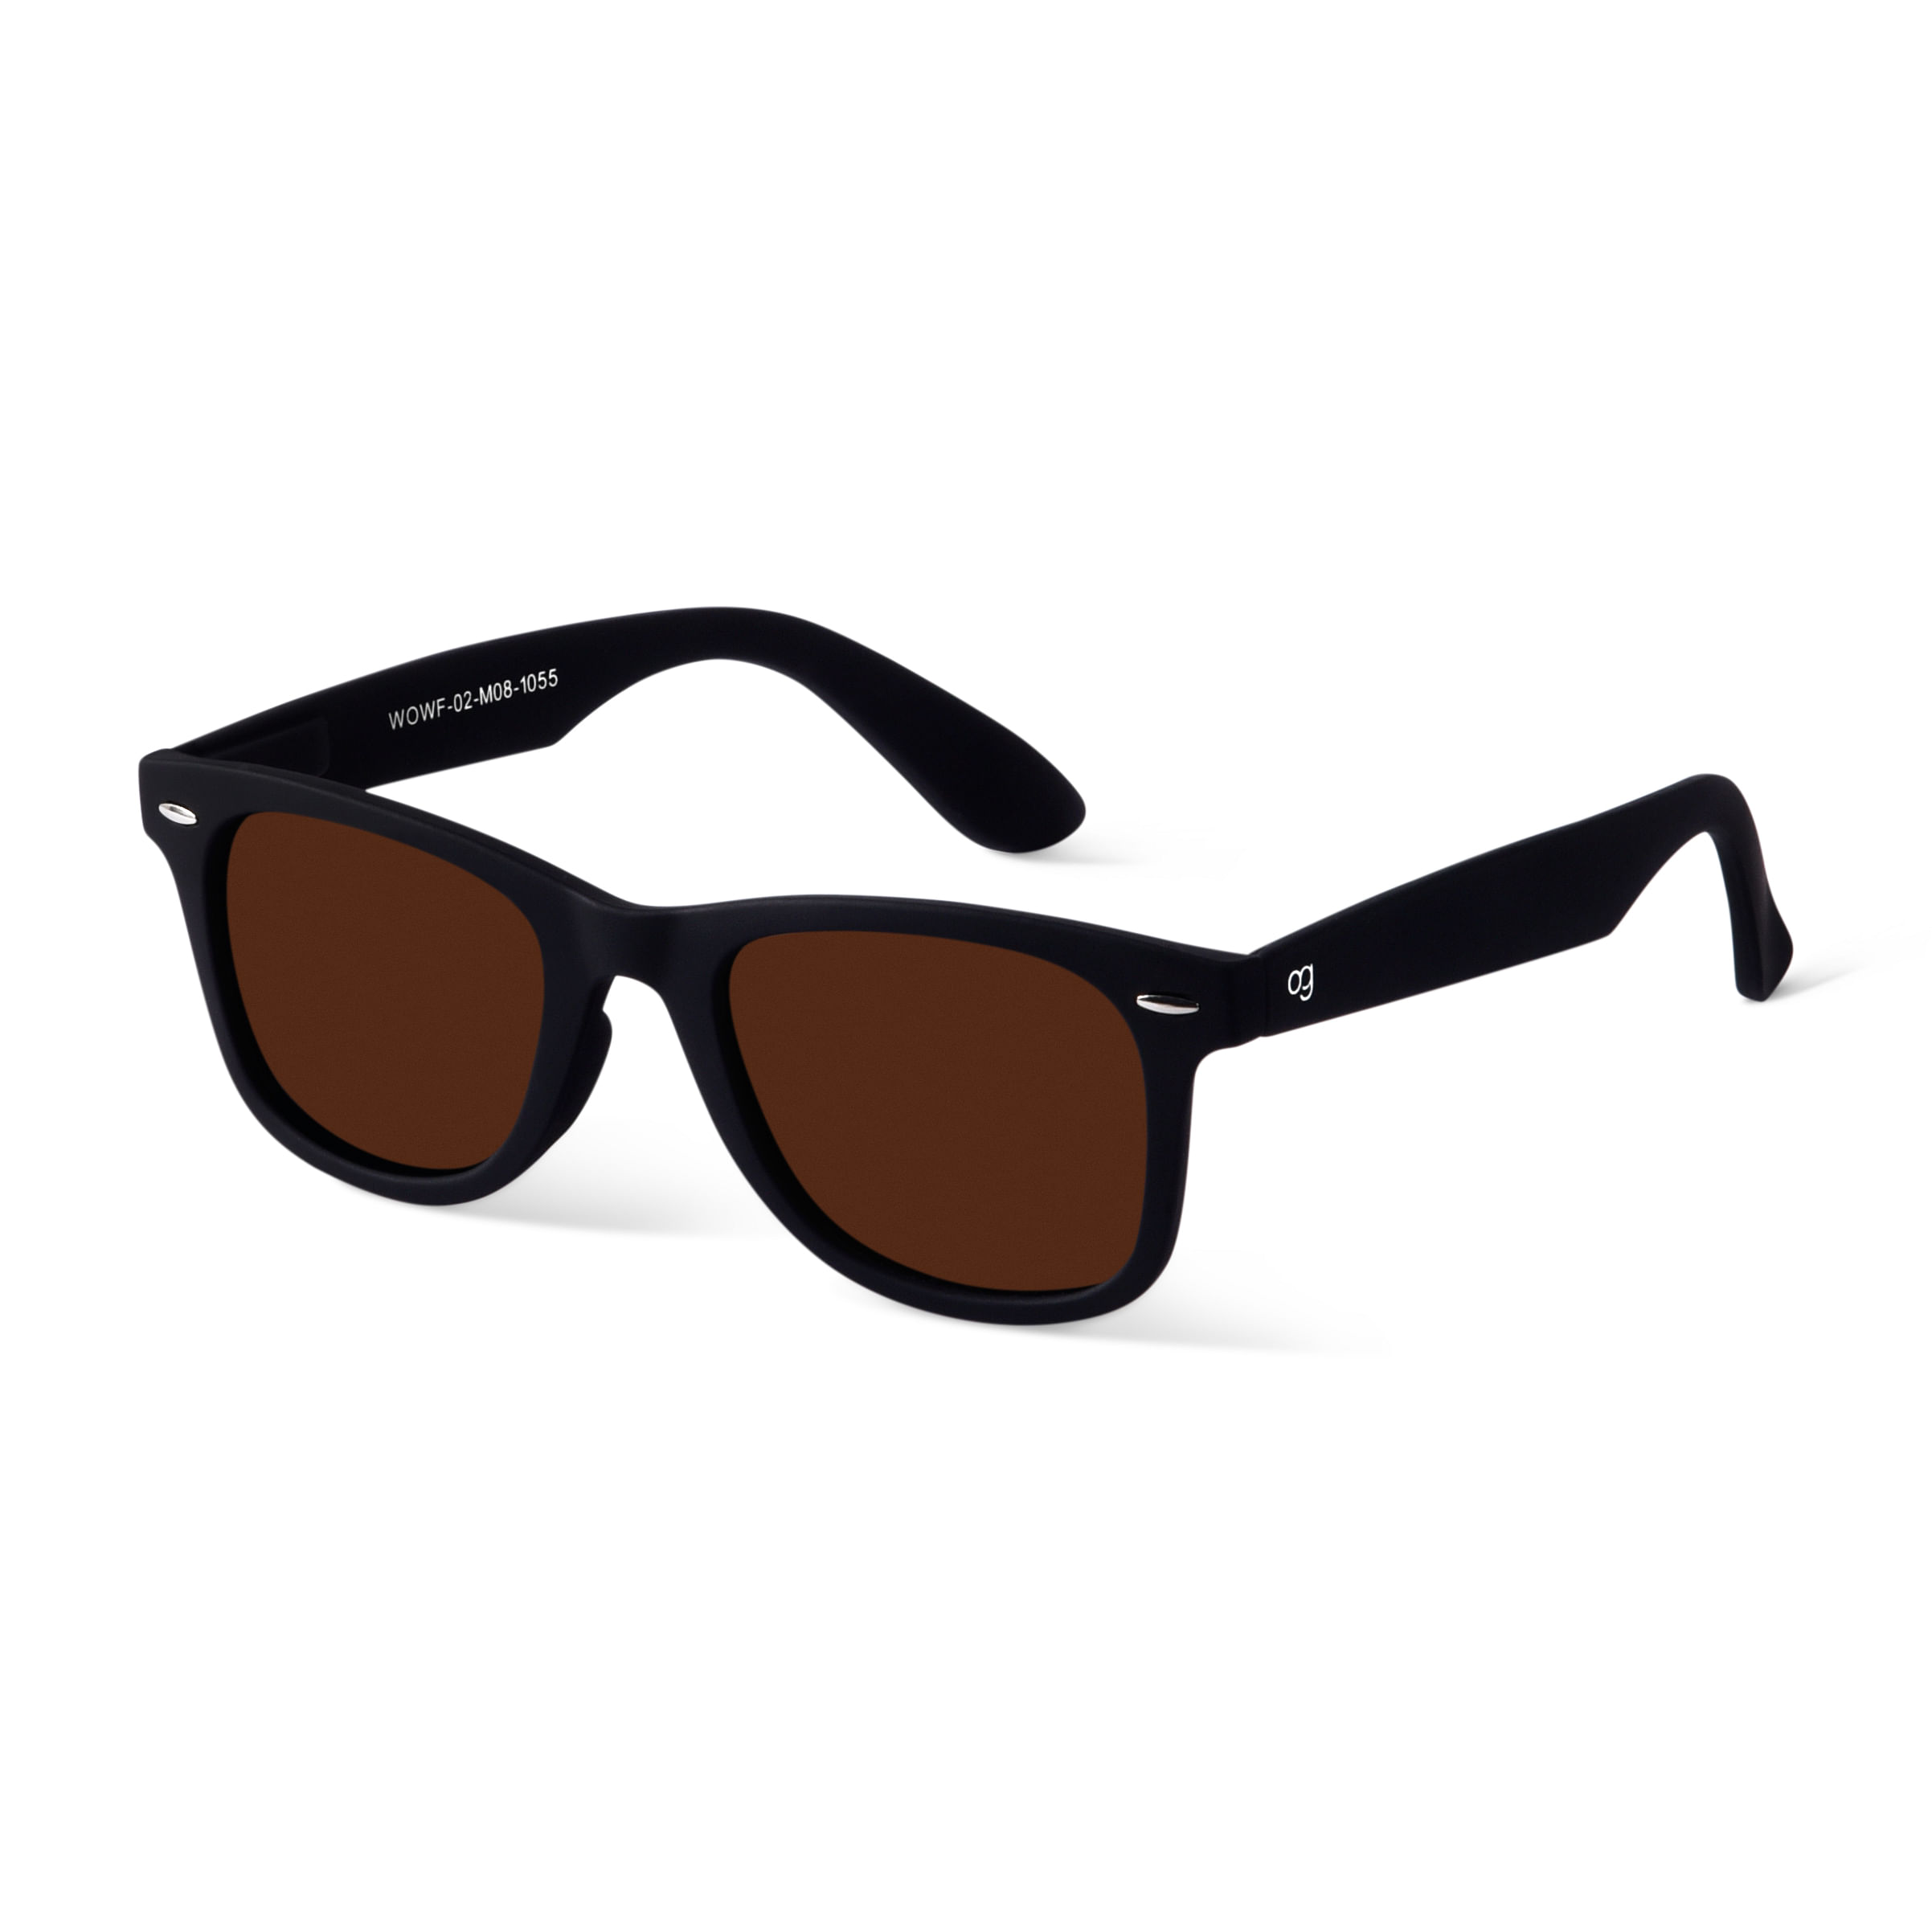 Aggregate more than 256 black or brown sunglasses best